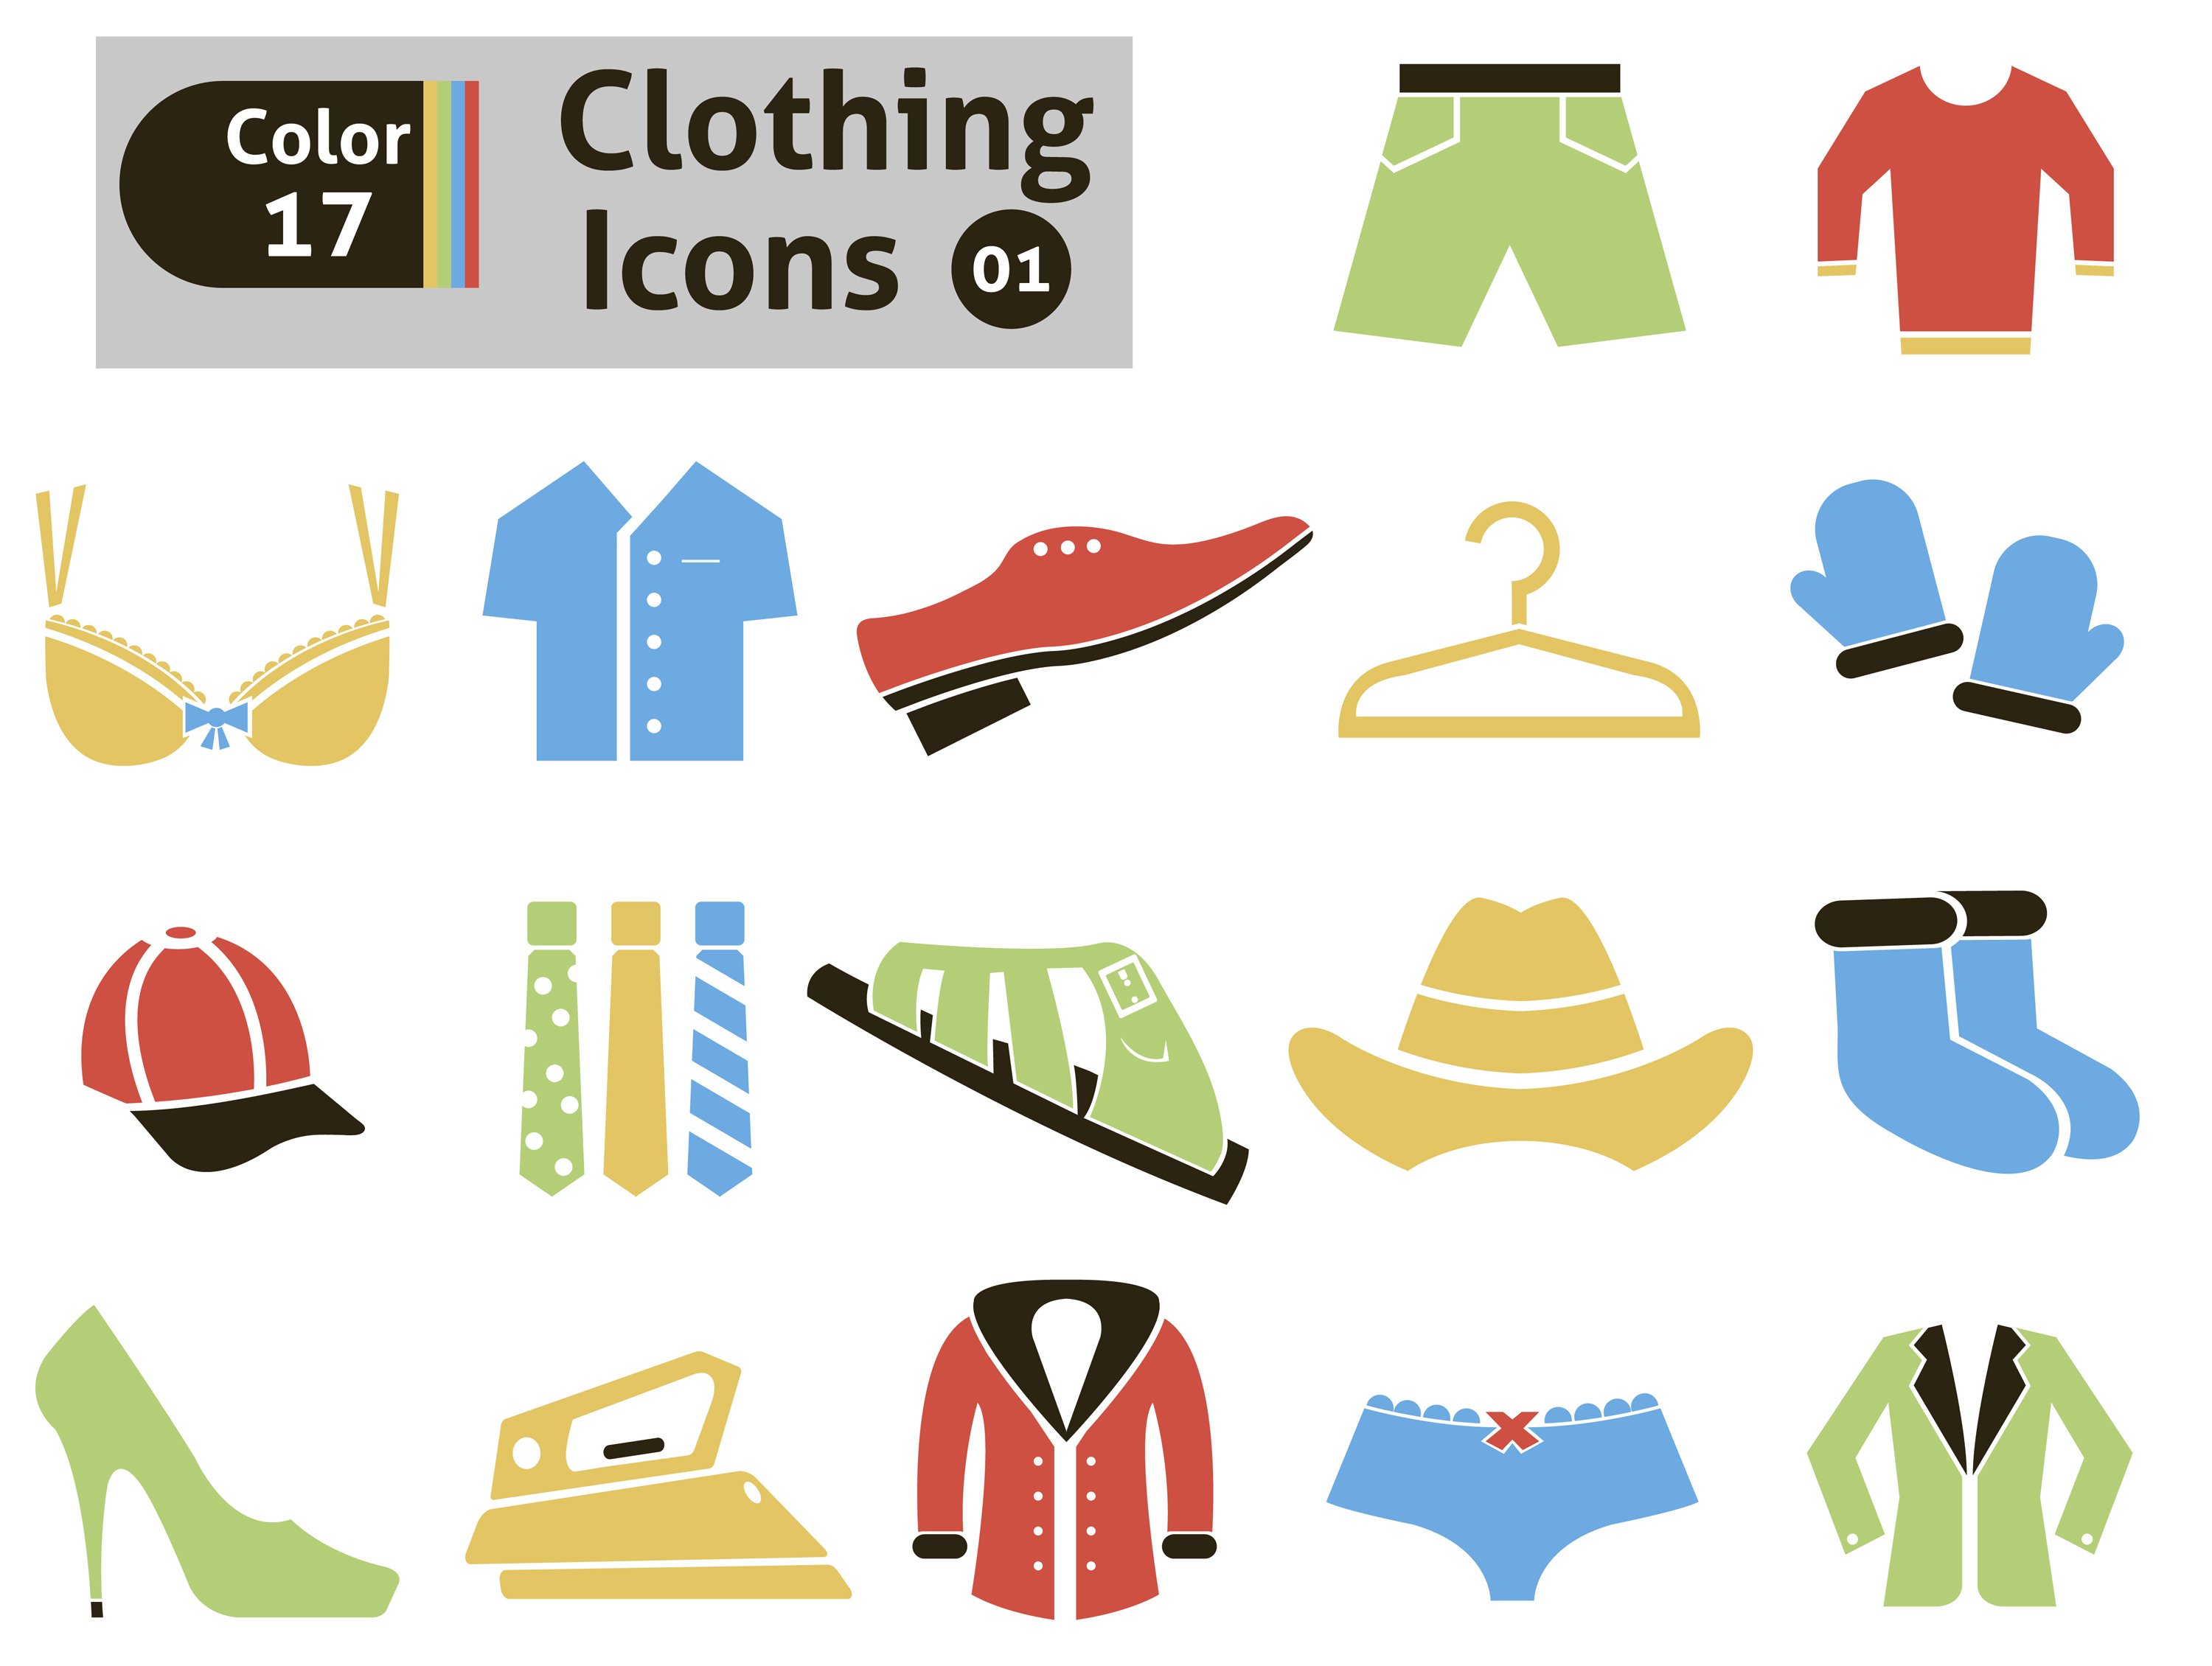 Clothing icons cover image.